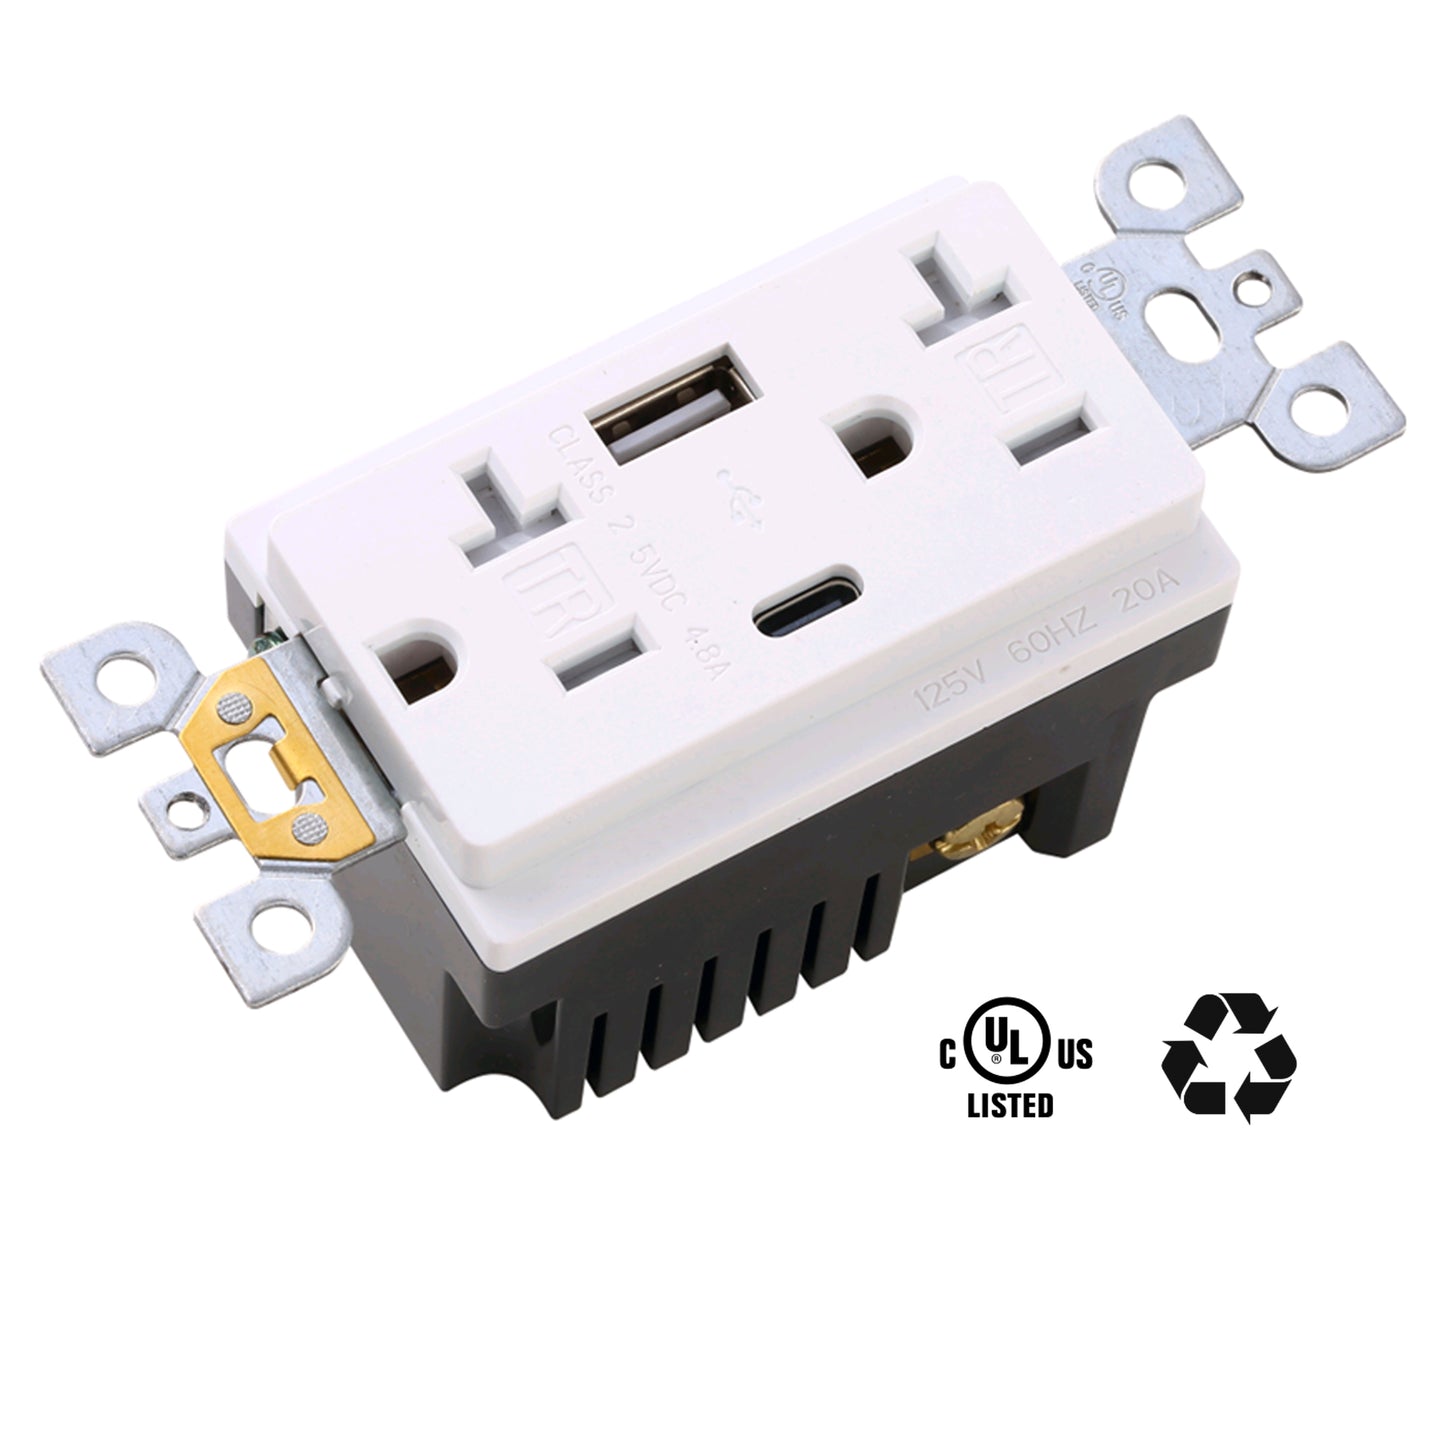 USB Charger Wall Outlet, USB Receptacle with Type A & Type C USB Ports, 20A Duplex Tamper Resistant Receptacle,UL Listed